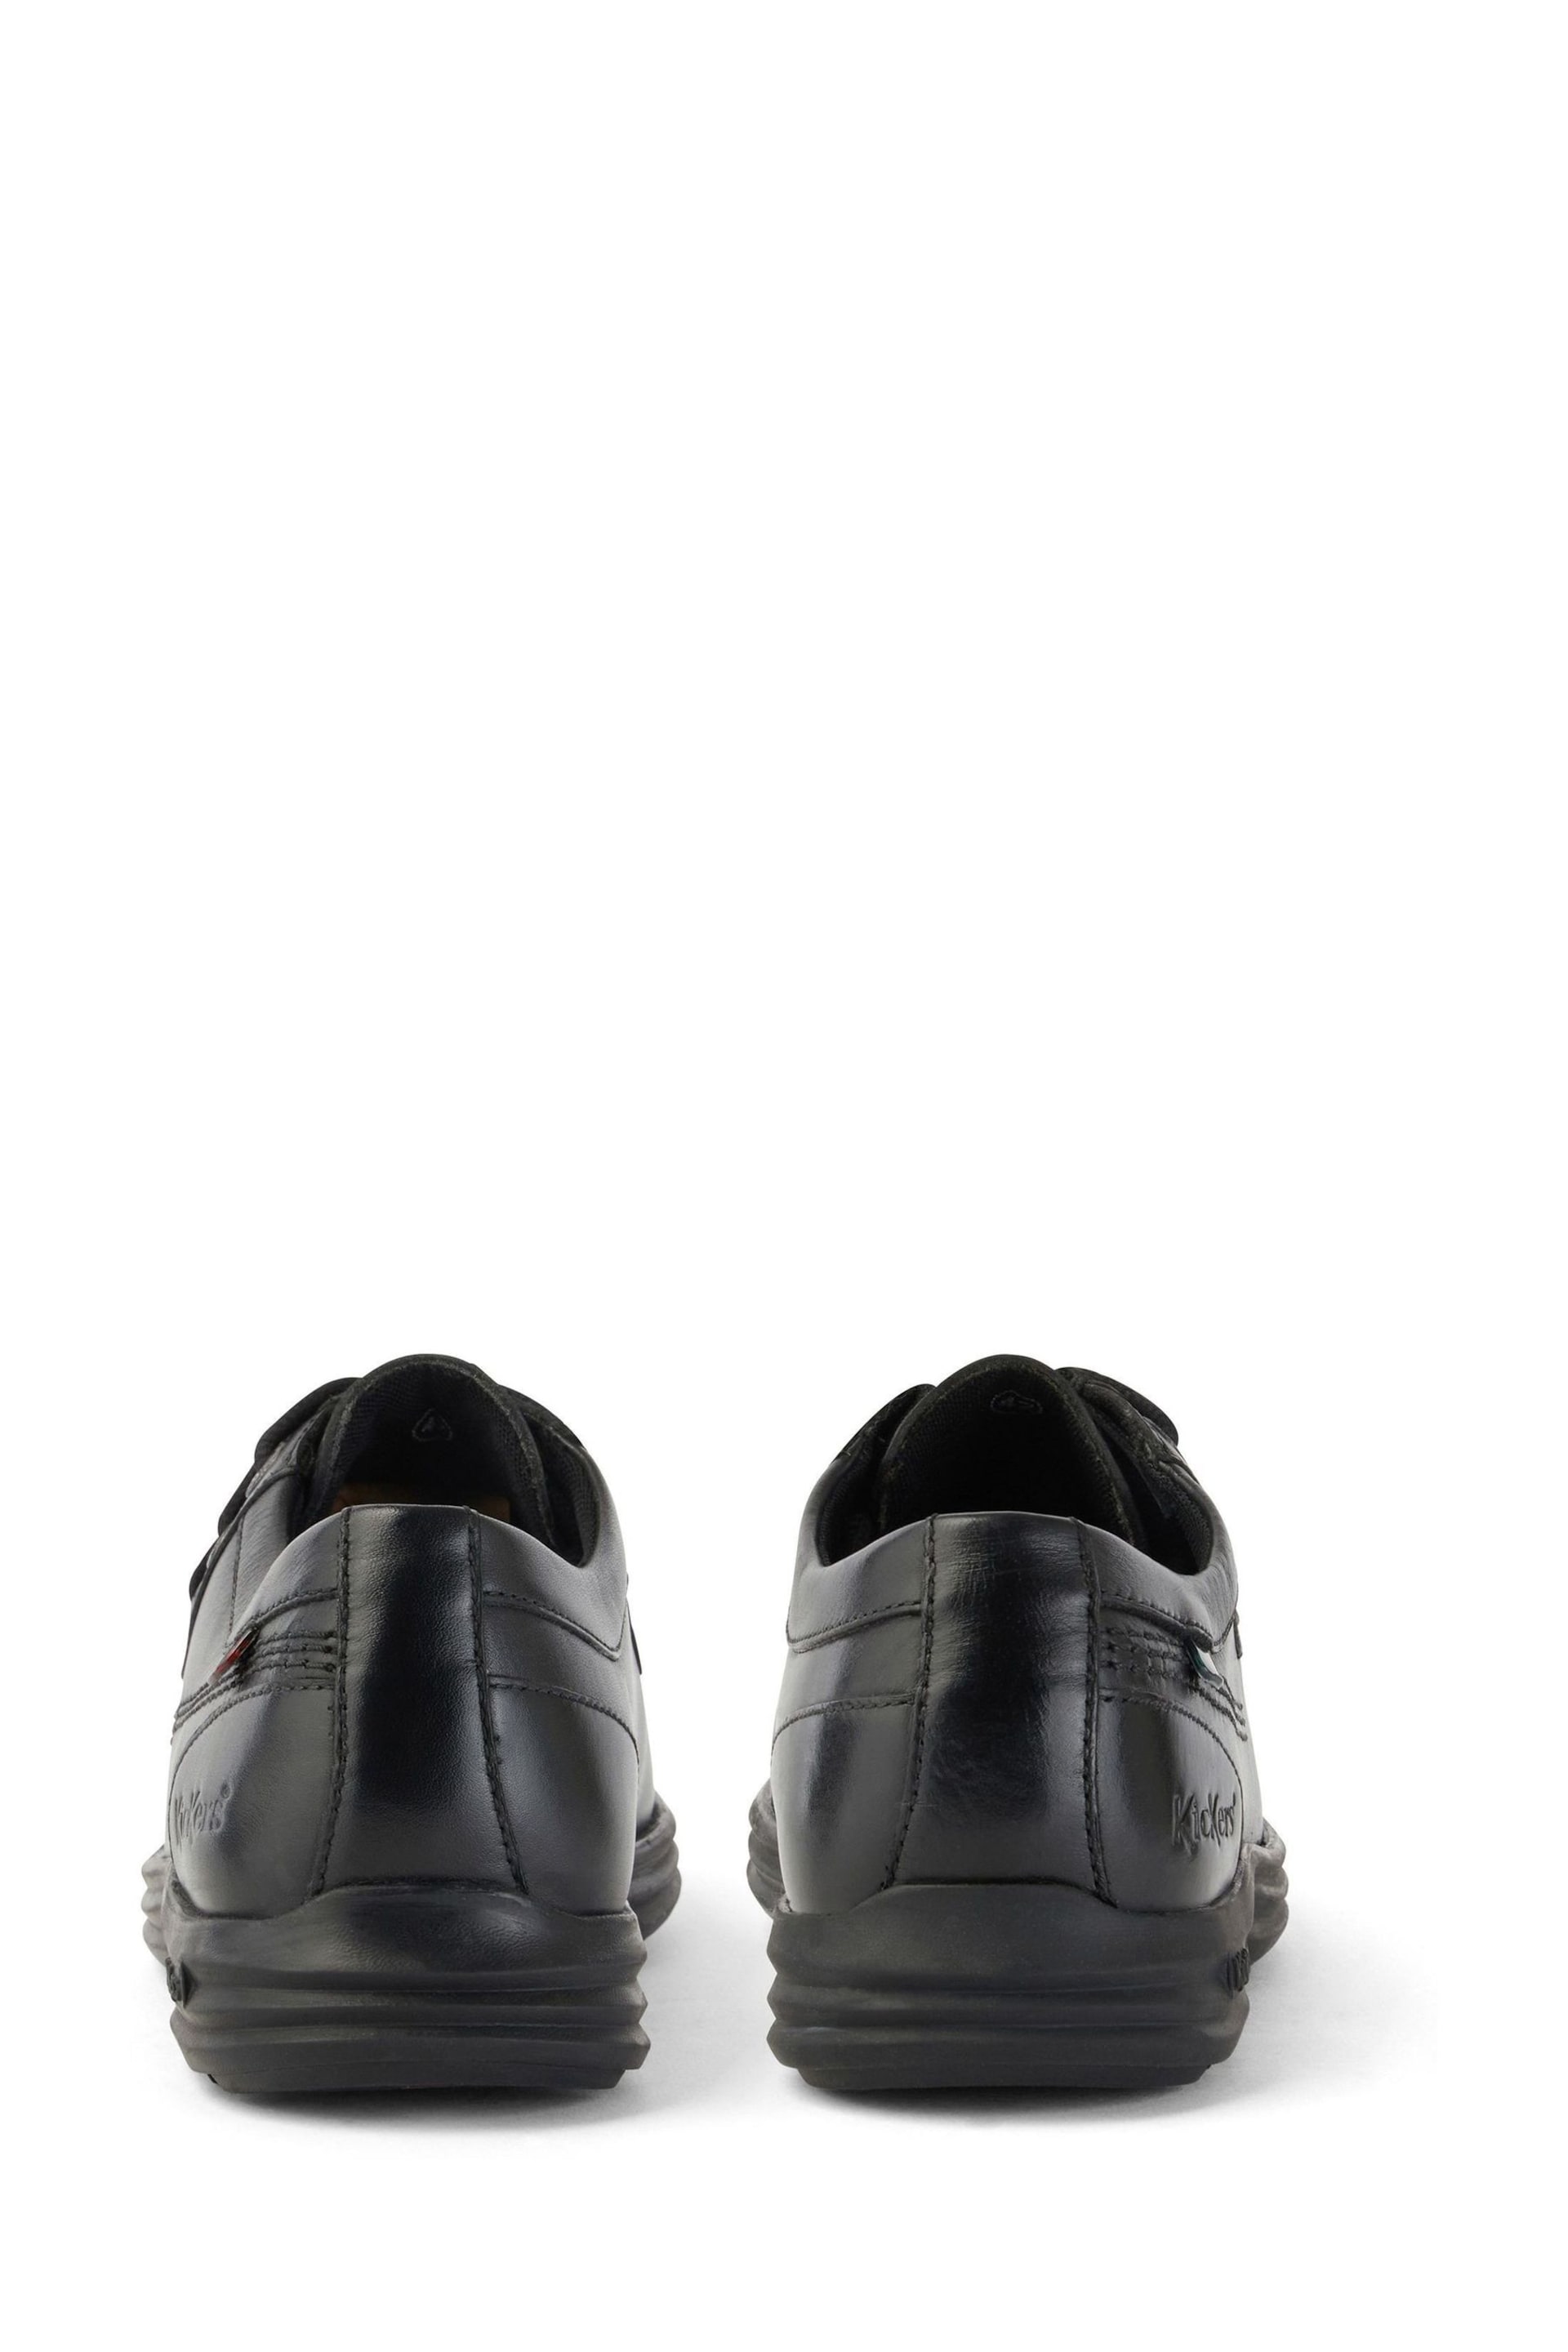 Kickers Reasan Mocc Leather Shoes - Image 4 of 6